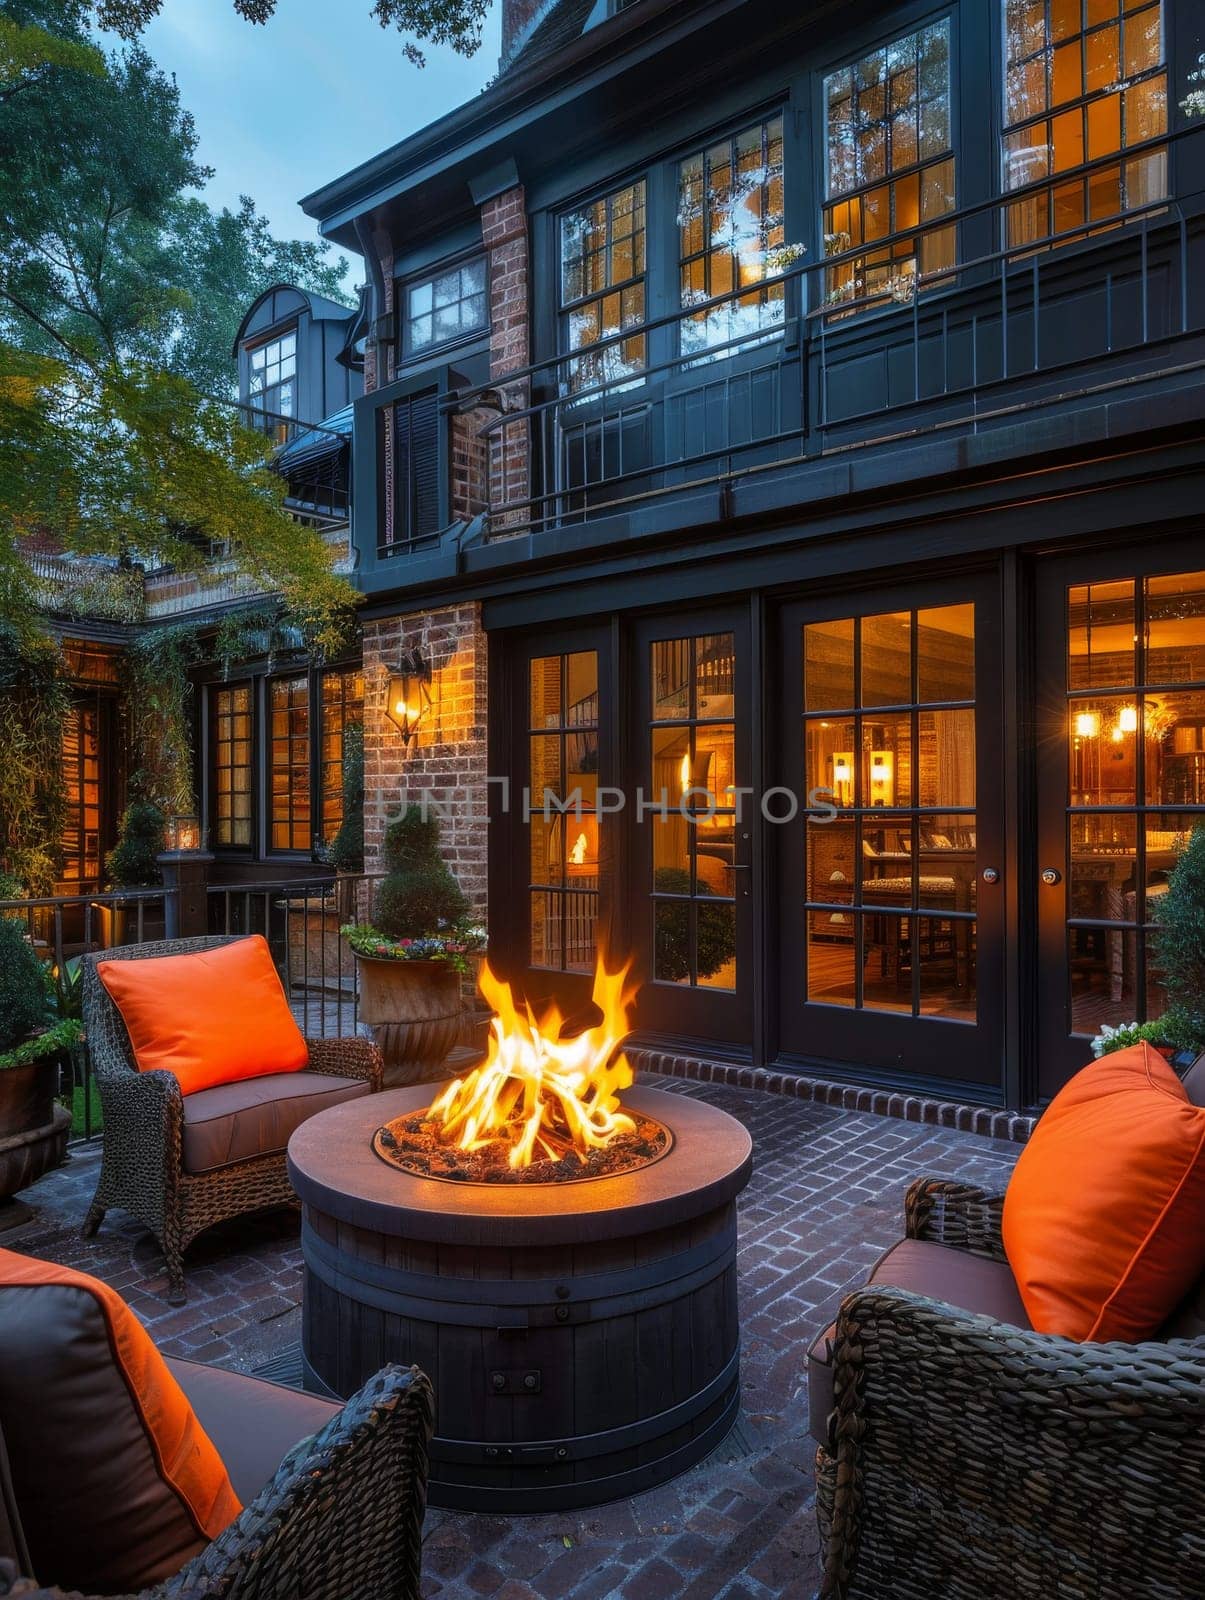 A fire pit is lit in a backyard with a couch and a table. The fire is surrounded by potted plants and a few chairs. Scene is cozy and inviting, perfect for relaxing and enjoying the outdoors